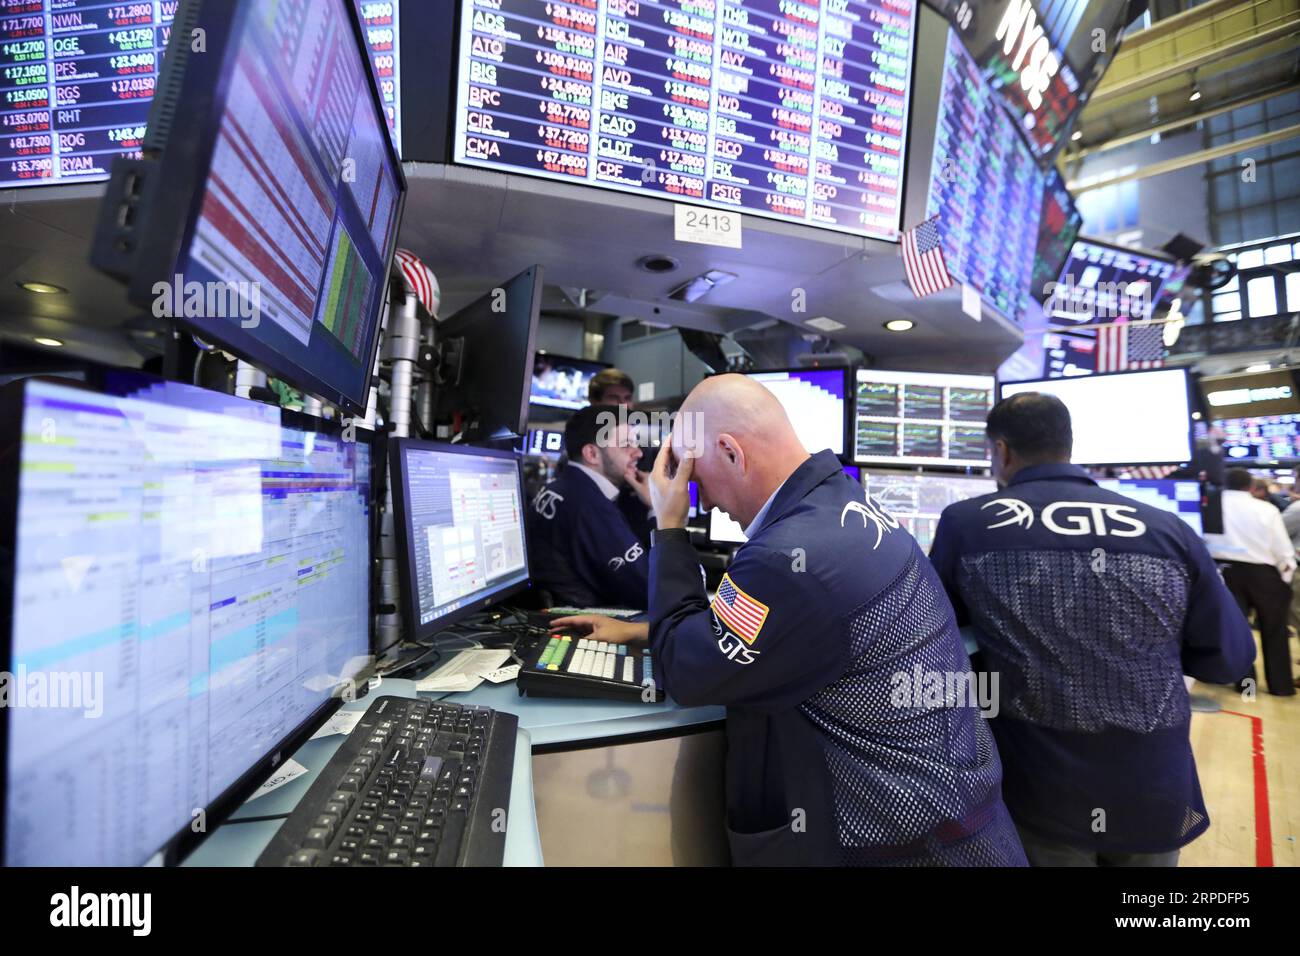 New York, Handelstag an der Wall Street 190802 -- NEW YORK, Aug. 2, 2019 -- Traders work at the New York Stock Exchange in New York, the United States, Aug. 2, 2019. U.S. stocks ended lower on Friday, as investors digested a batch of economic data and a Fed official expressed dissent over the central bank s rate cut move. The Dow Jones Industrial Average decreased 98.41 points, or 0.37 percent, to 26,485.01. The S&P 500 fell 21.51 points, or 0.73 percent, to 2,932.05. The Nasdaq Composite Index shed 107.05 points, or 1.32 percent, to 8,004.07.  U.S.-NEW YORK-STOCKS WangxYing PUBLICATIONxNOTxIN Stock Photo